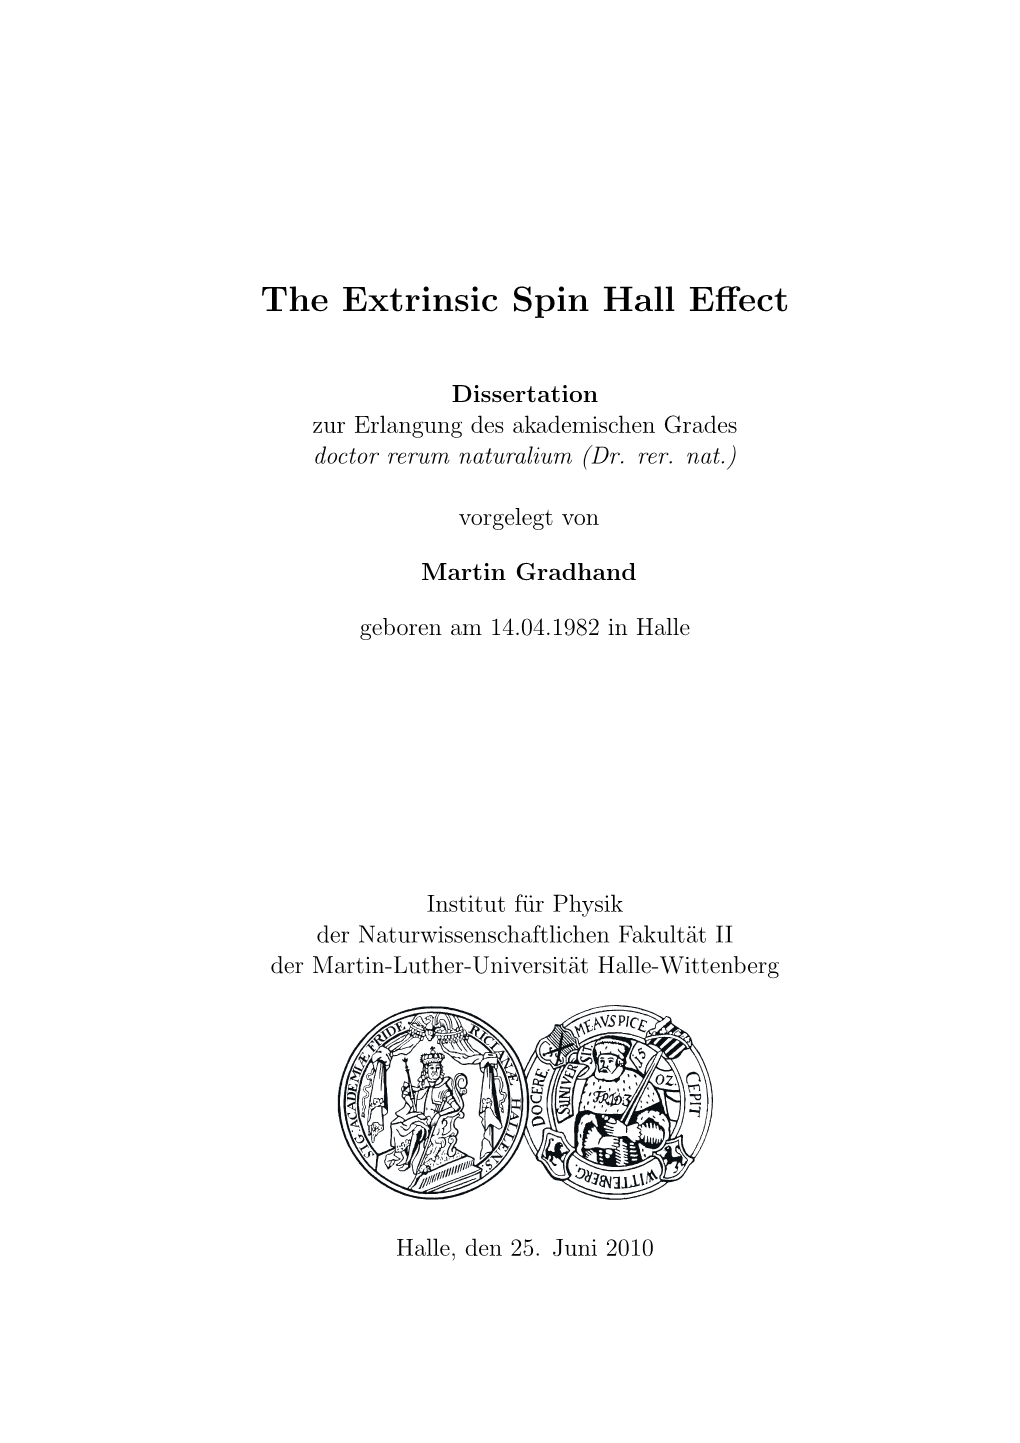 The Extrinsic Spin Hall Effect